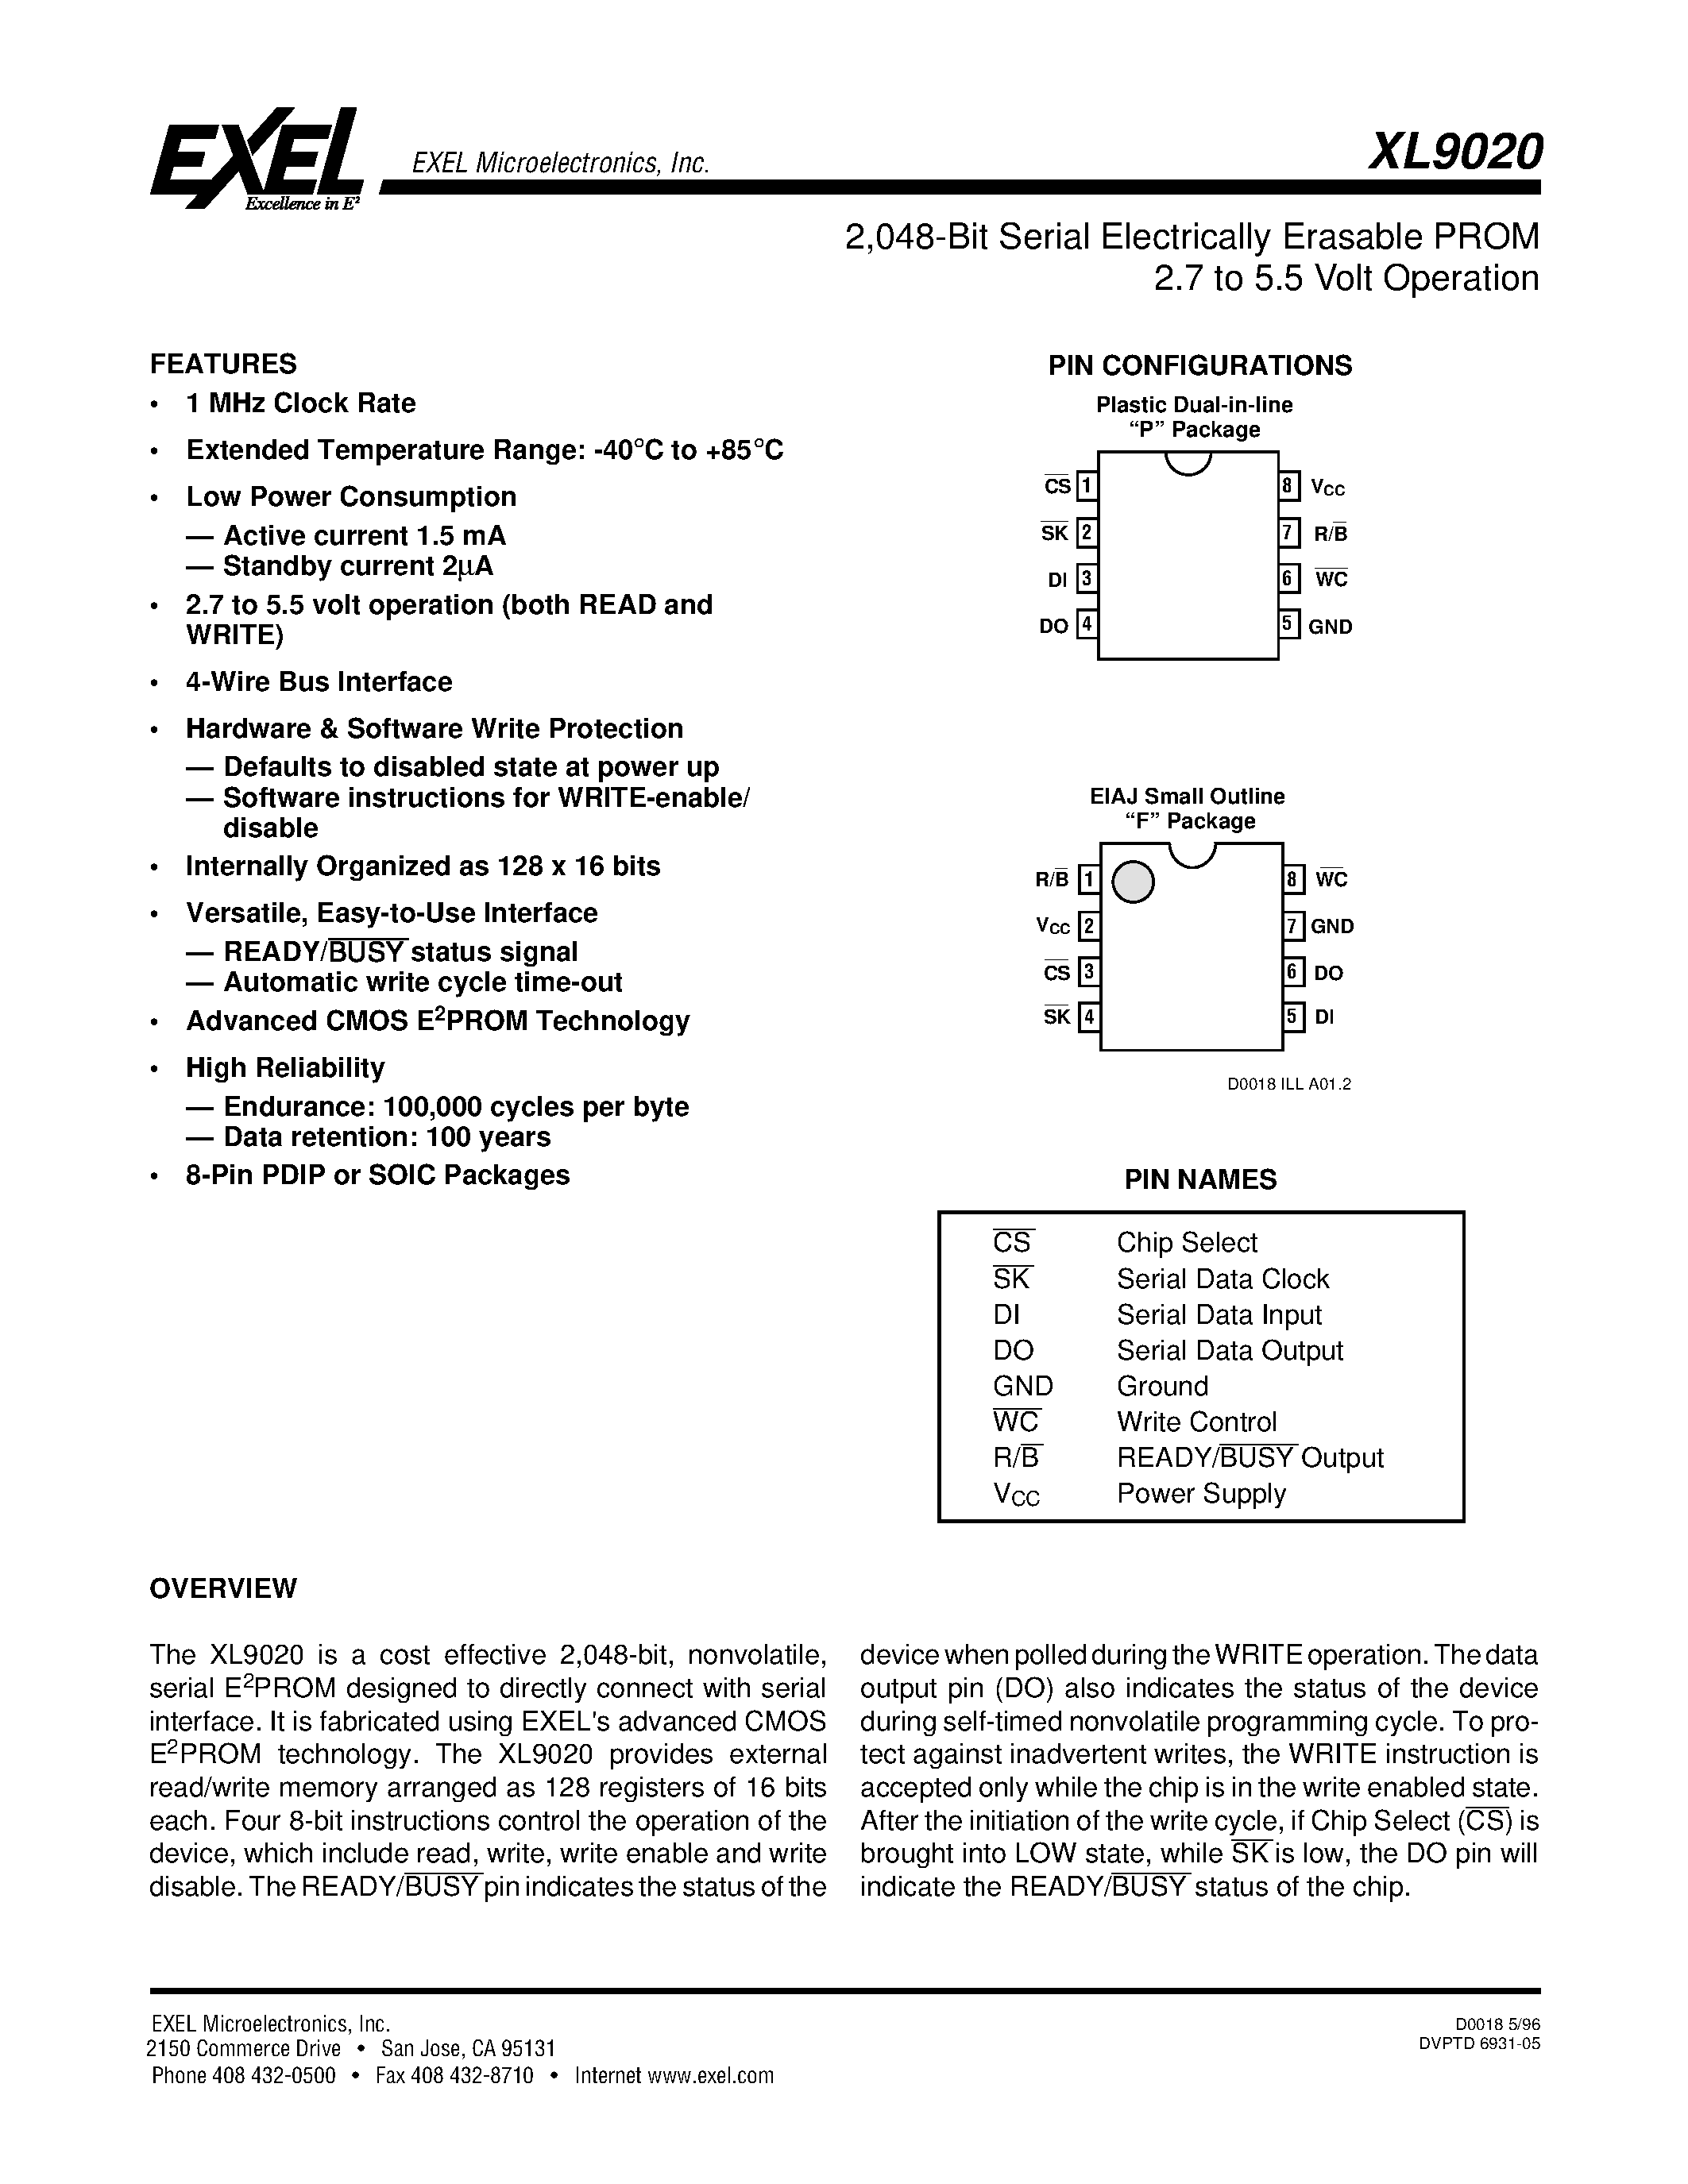 Datasheet XL9020F - 2/048-Bit Serial Electrically Erasable PROM 2.7 to 5.5 Volt Operation page 1